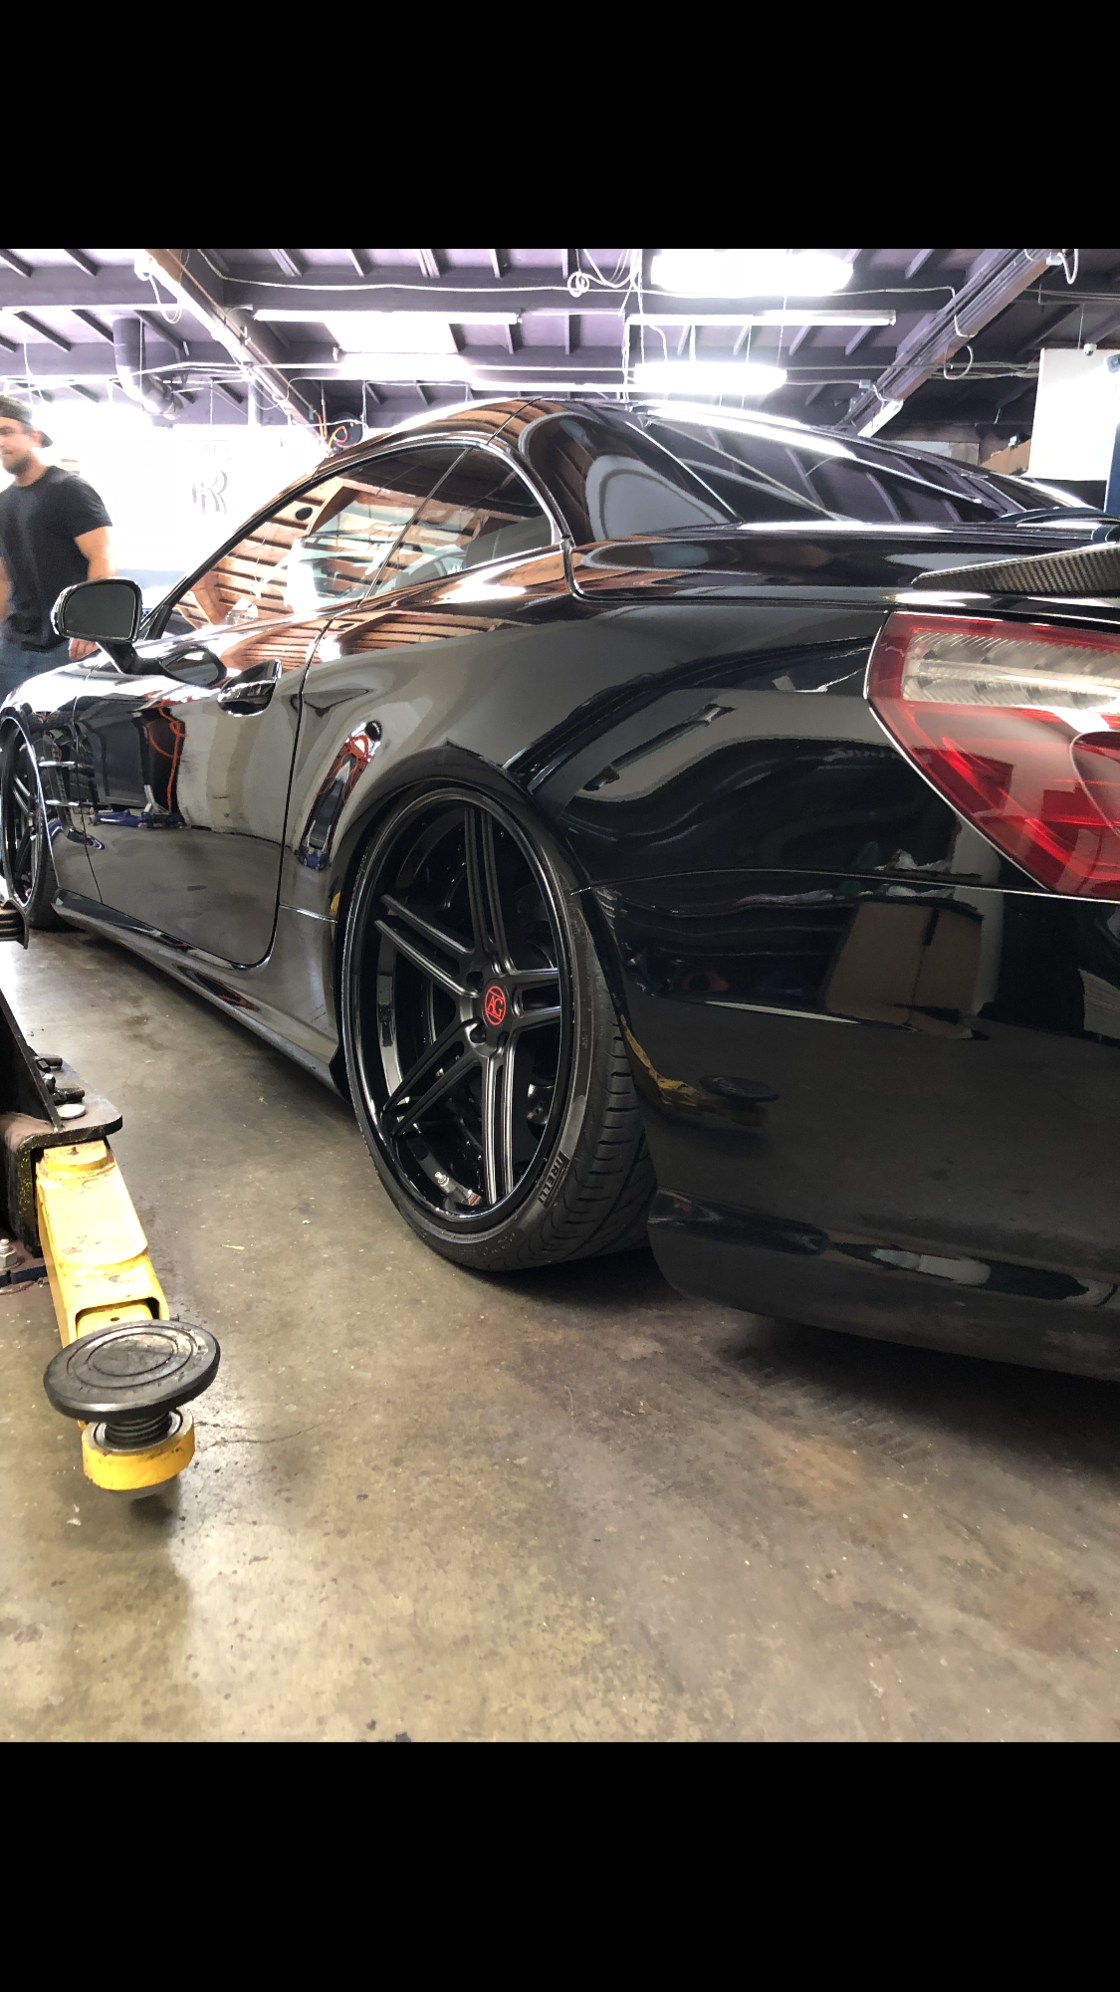 Wheels and Tires/Axles - 20 x9 & 20 x 11 AG wheels for sale - Used - 2013 to 2017 Mercedes-Benz SL550 - Dublin, CA 94568, United States